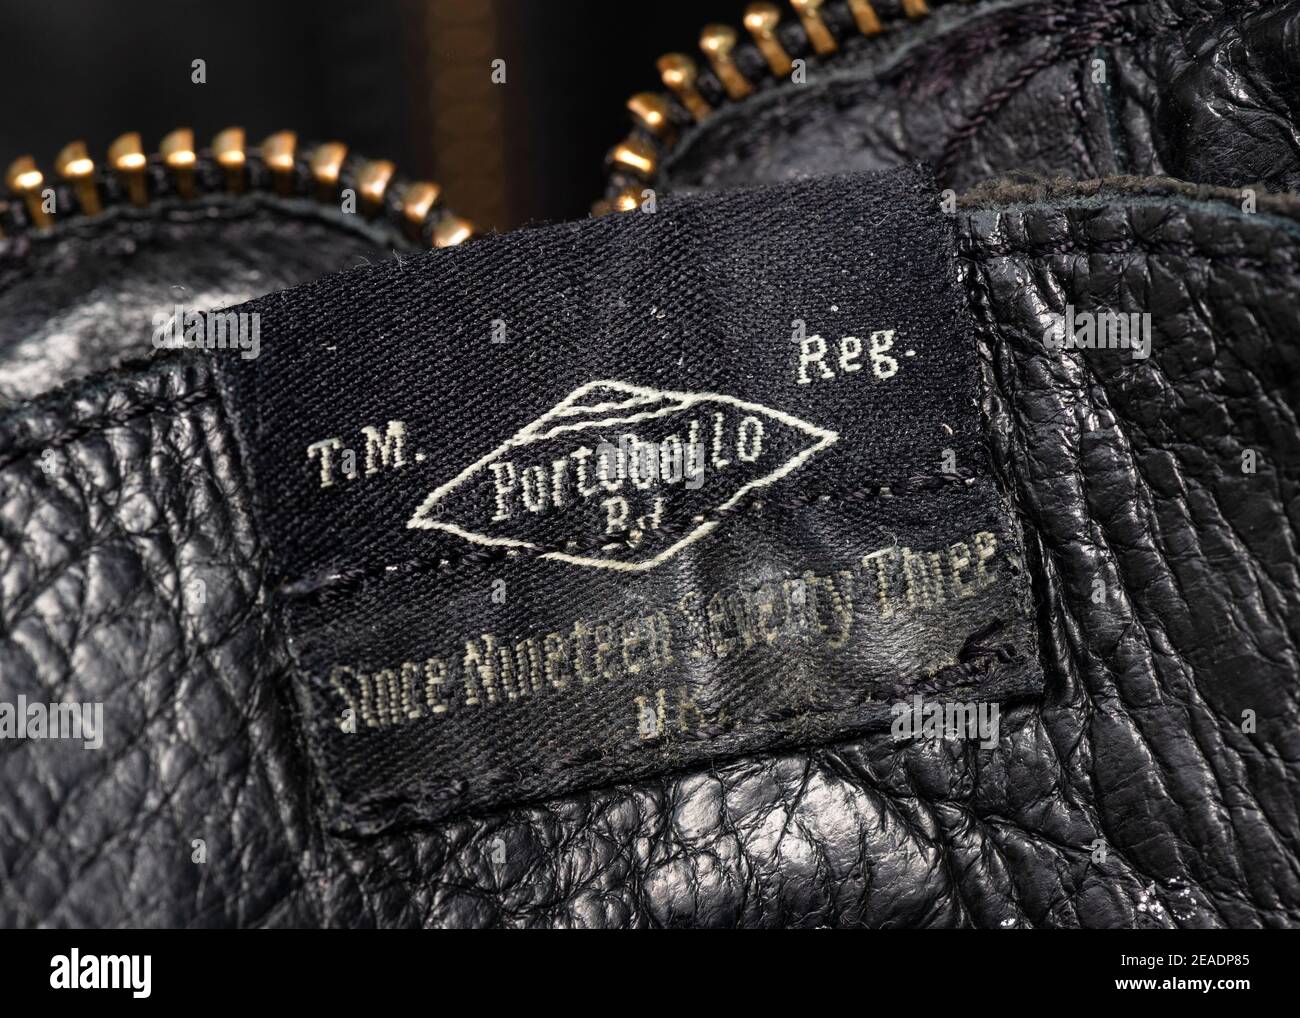 Portobello Rd. vintage worn out label on Pepe Jeans black leather men's boots close up detail Stock Photo